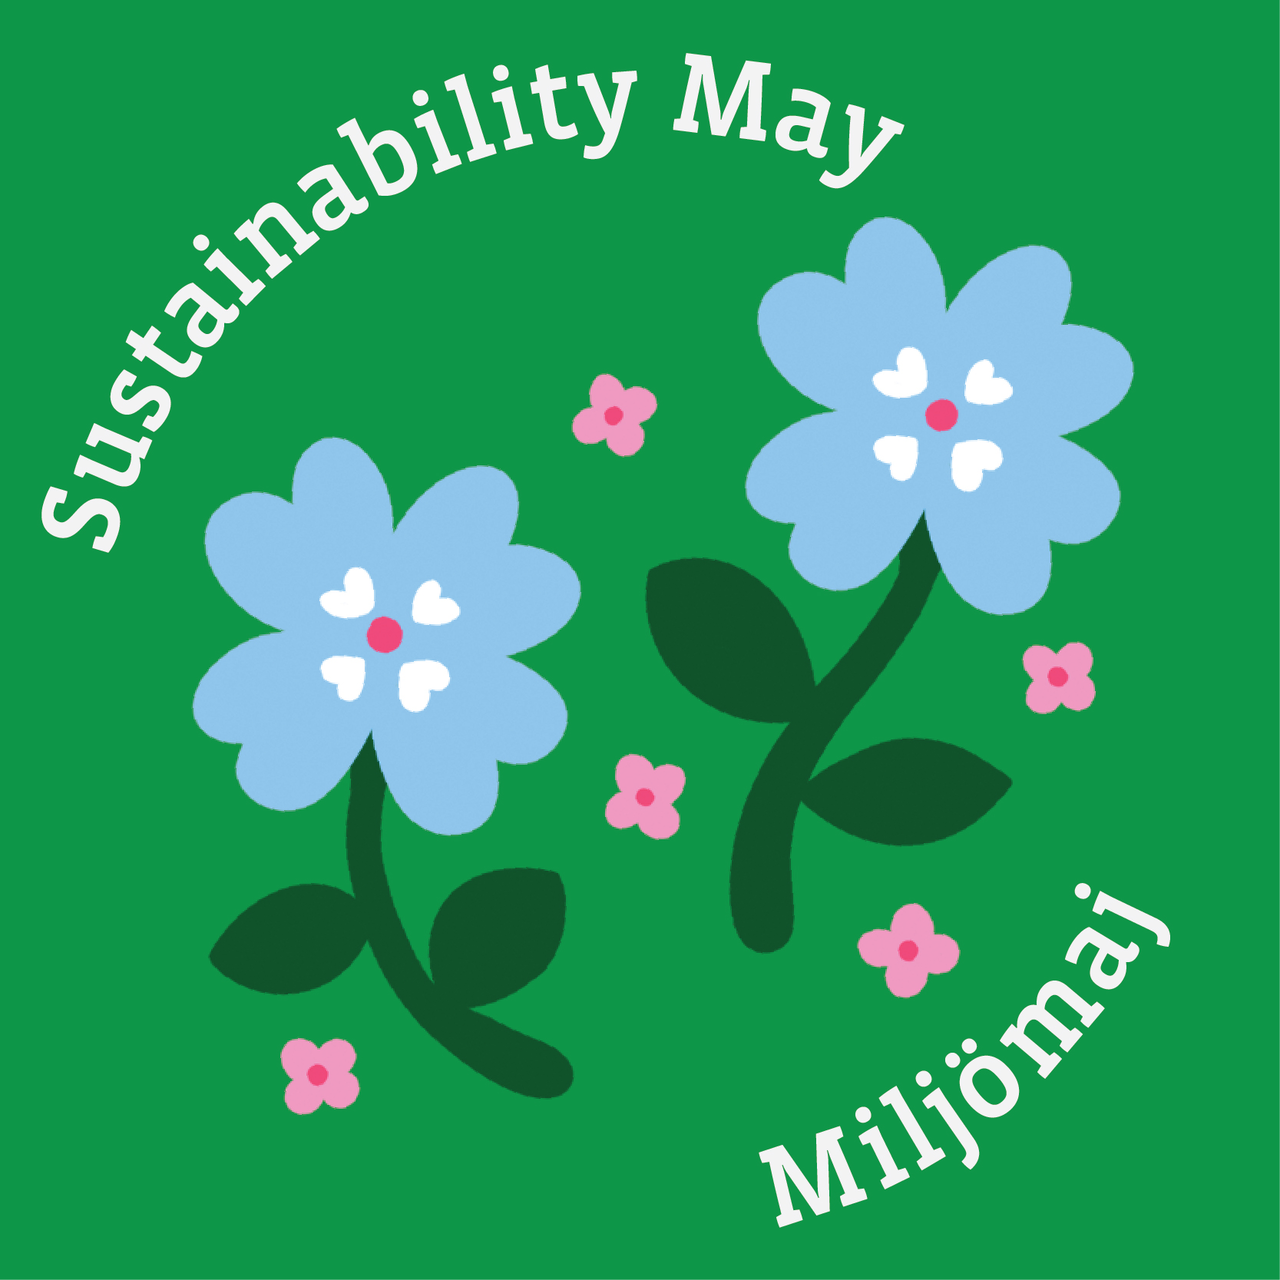 Picture with flowers and text that says Sustainability May Miljömaj